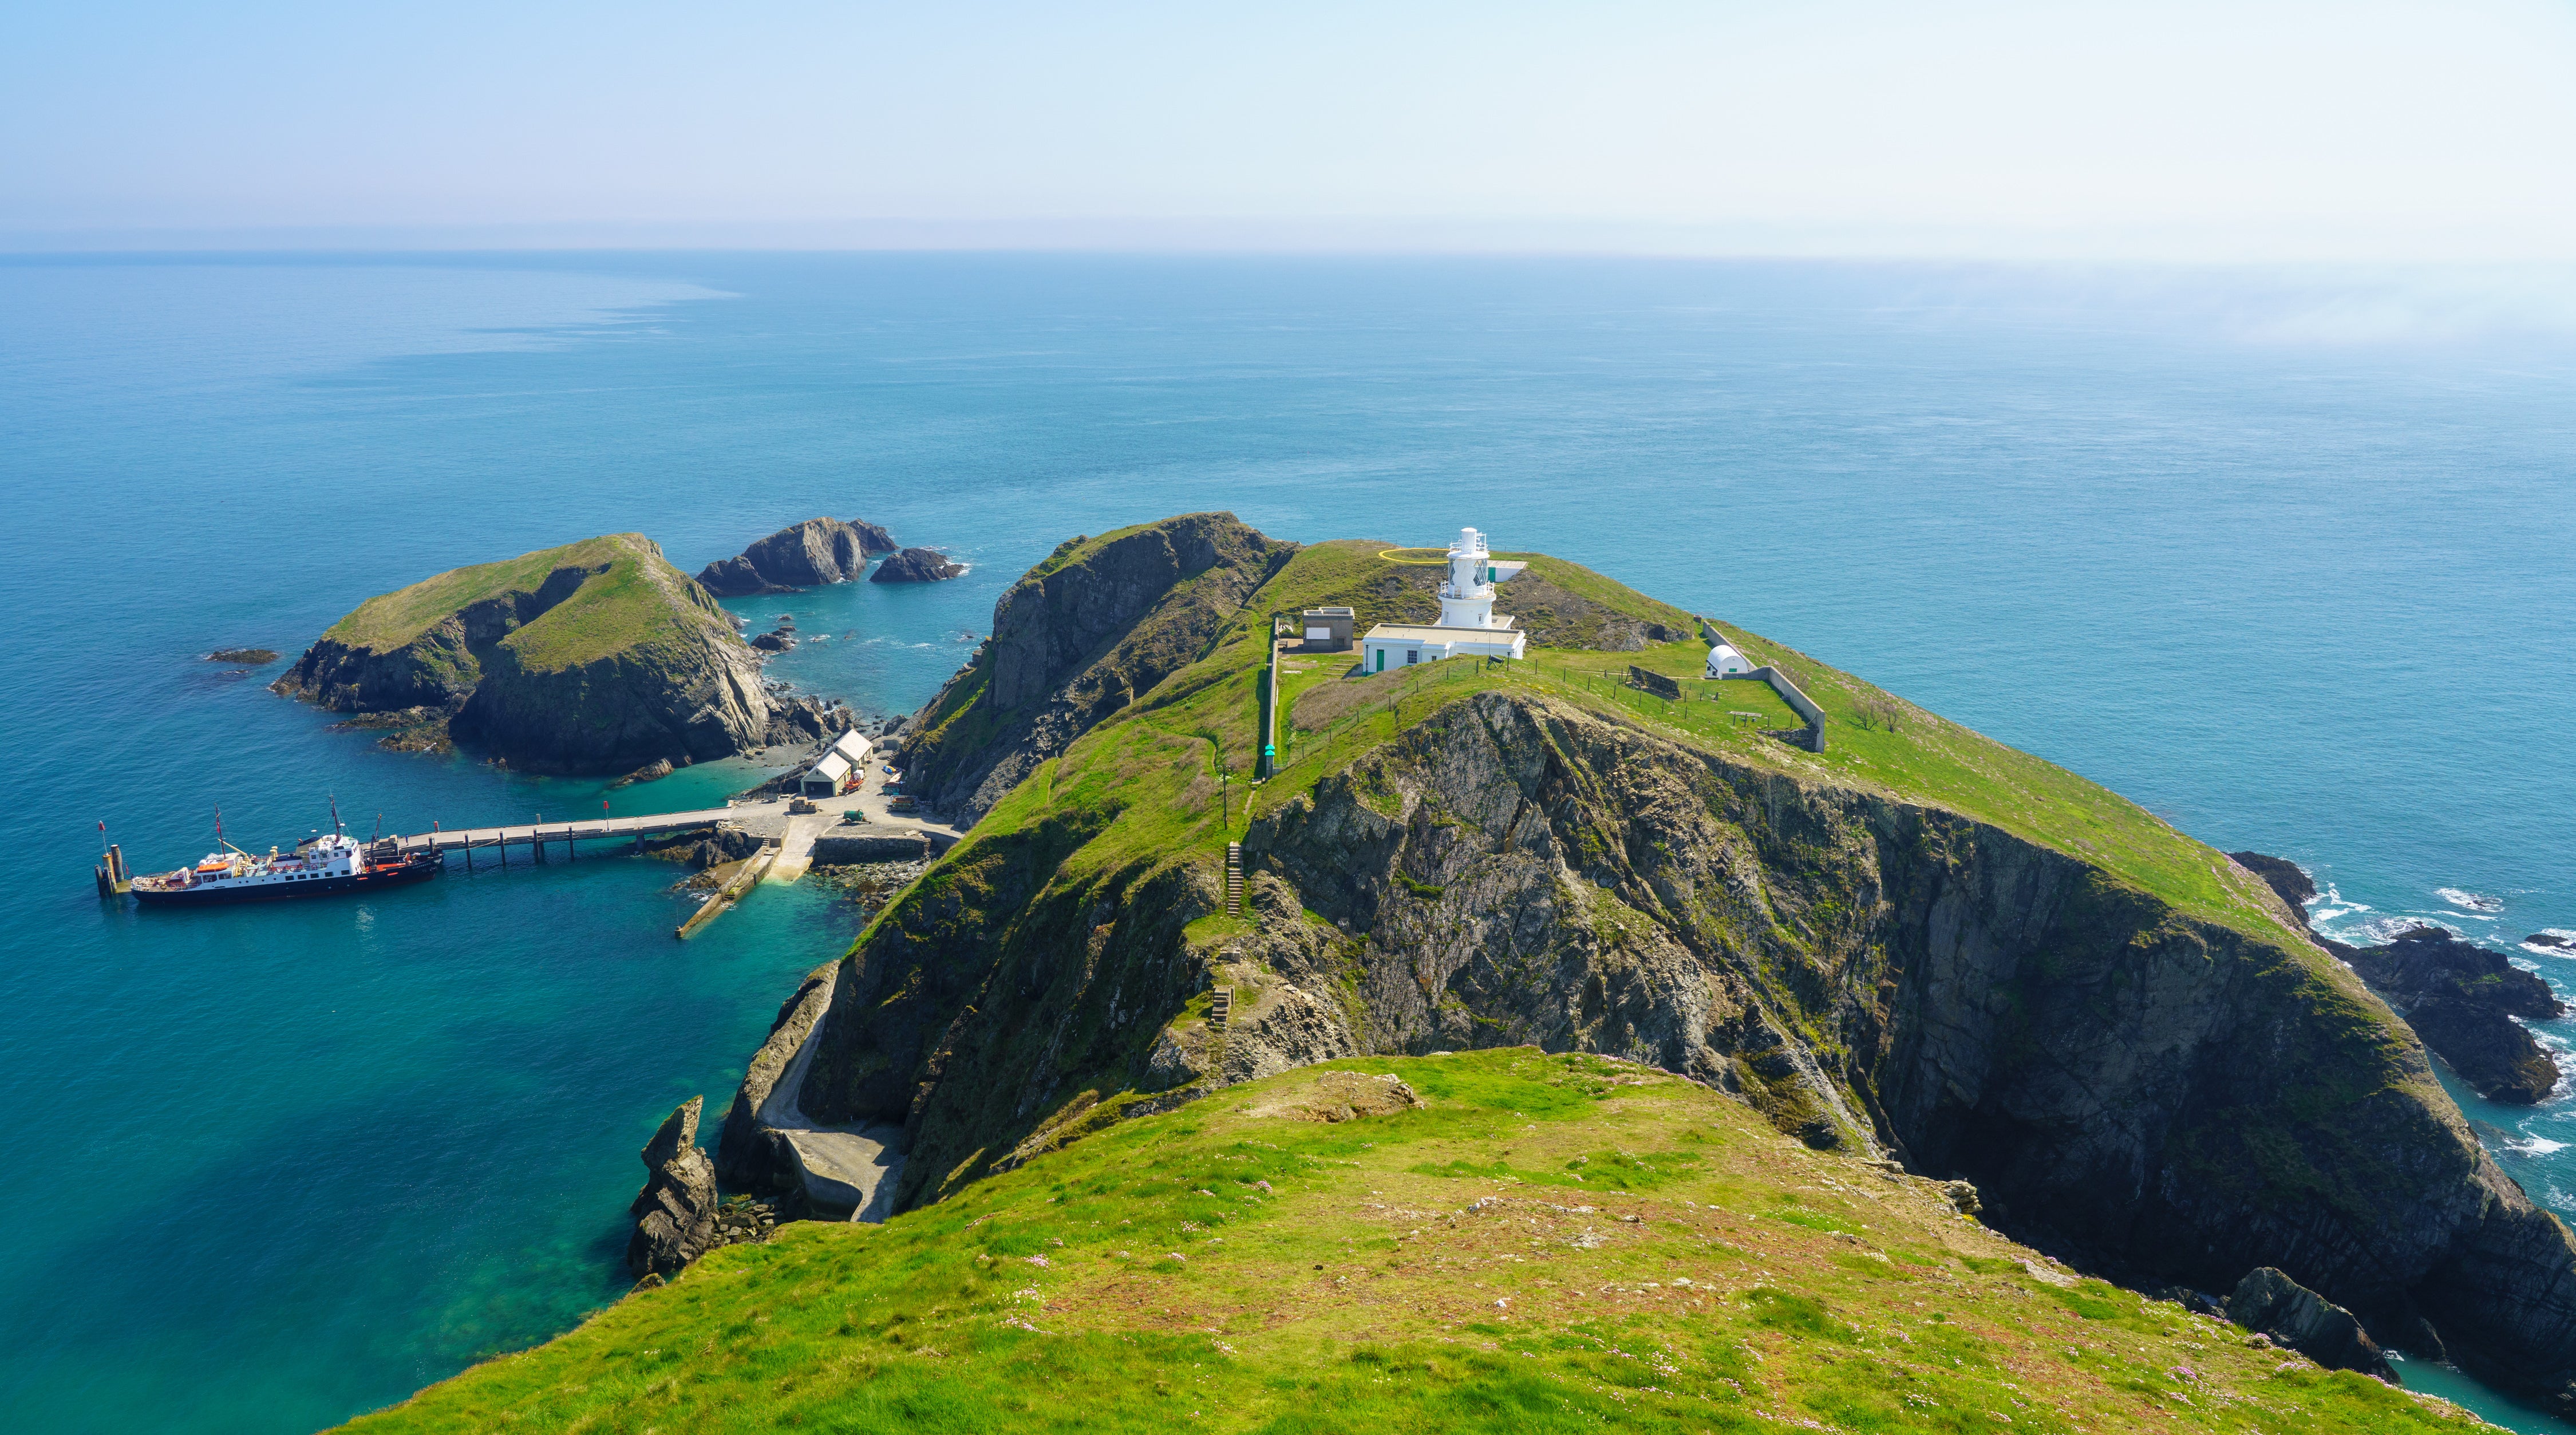 Divers will find a lively marine life under Lundy Island’s waters